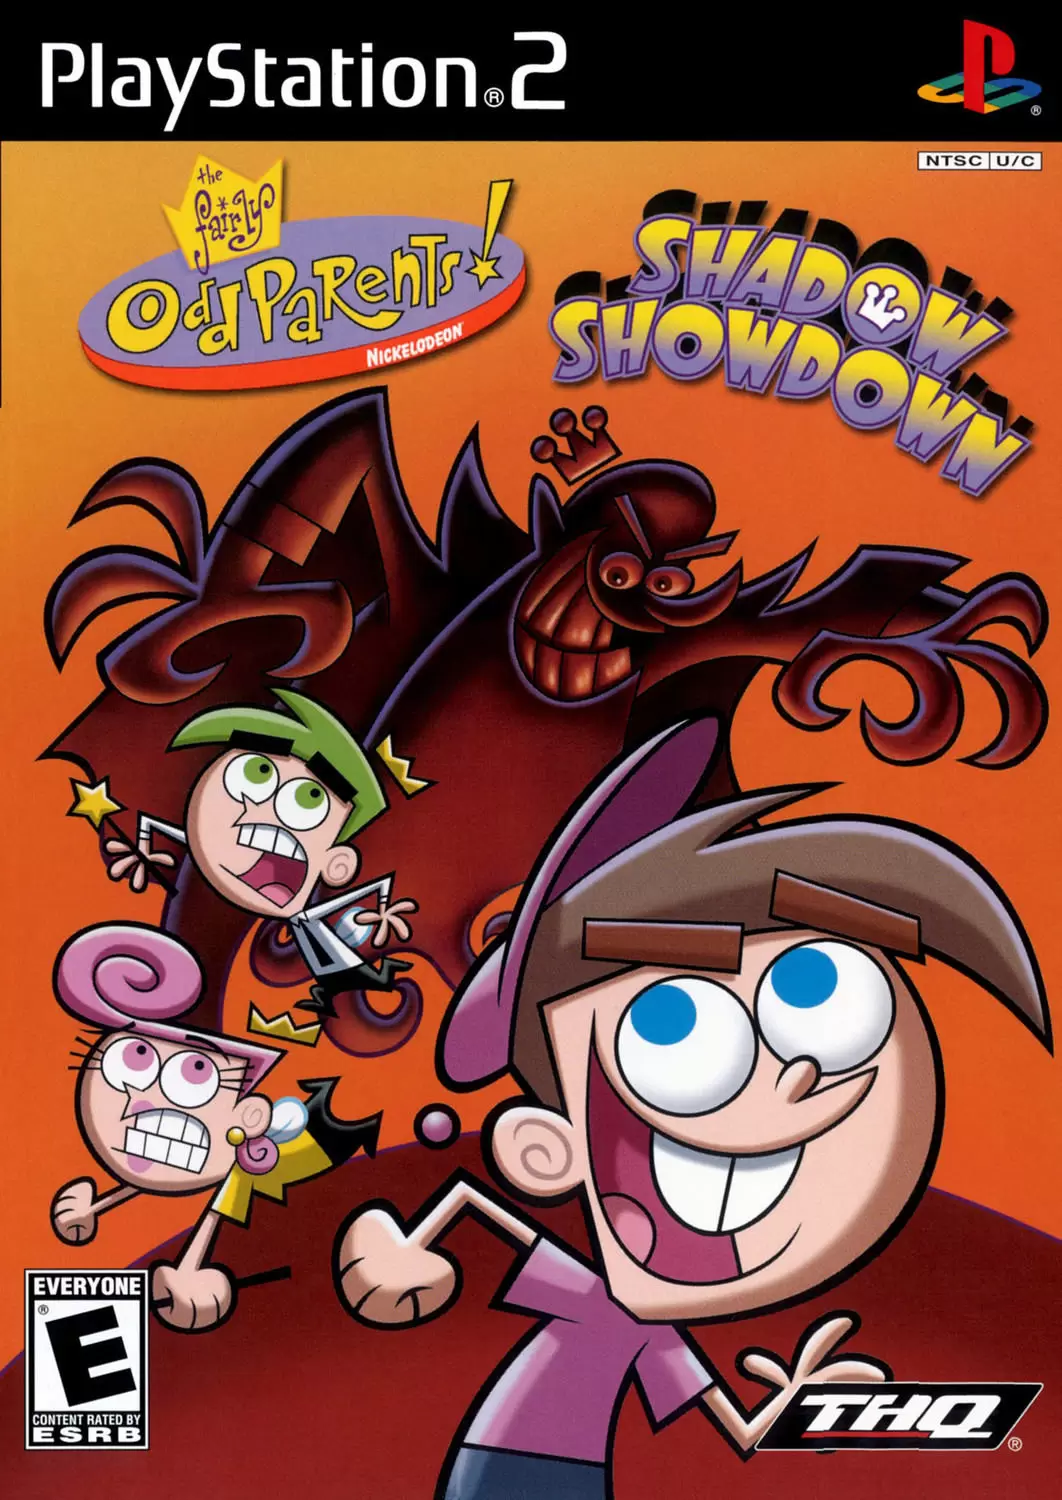 PS2 Games - The Fairly OddParents: Shadow Showdown